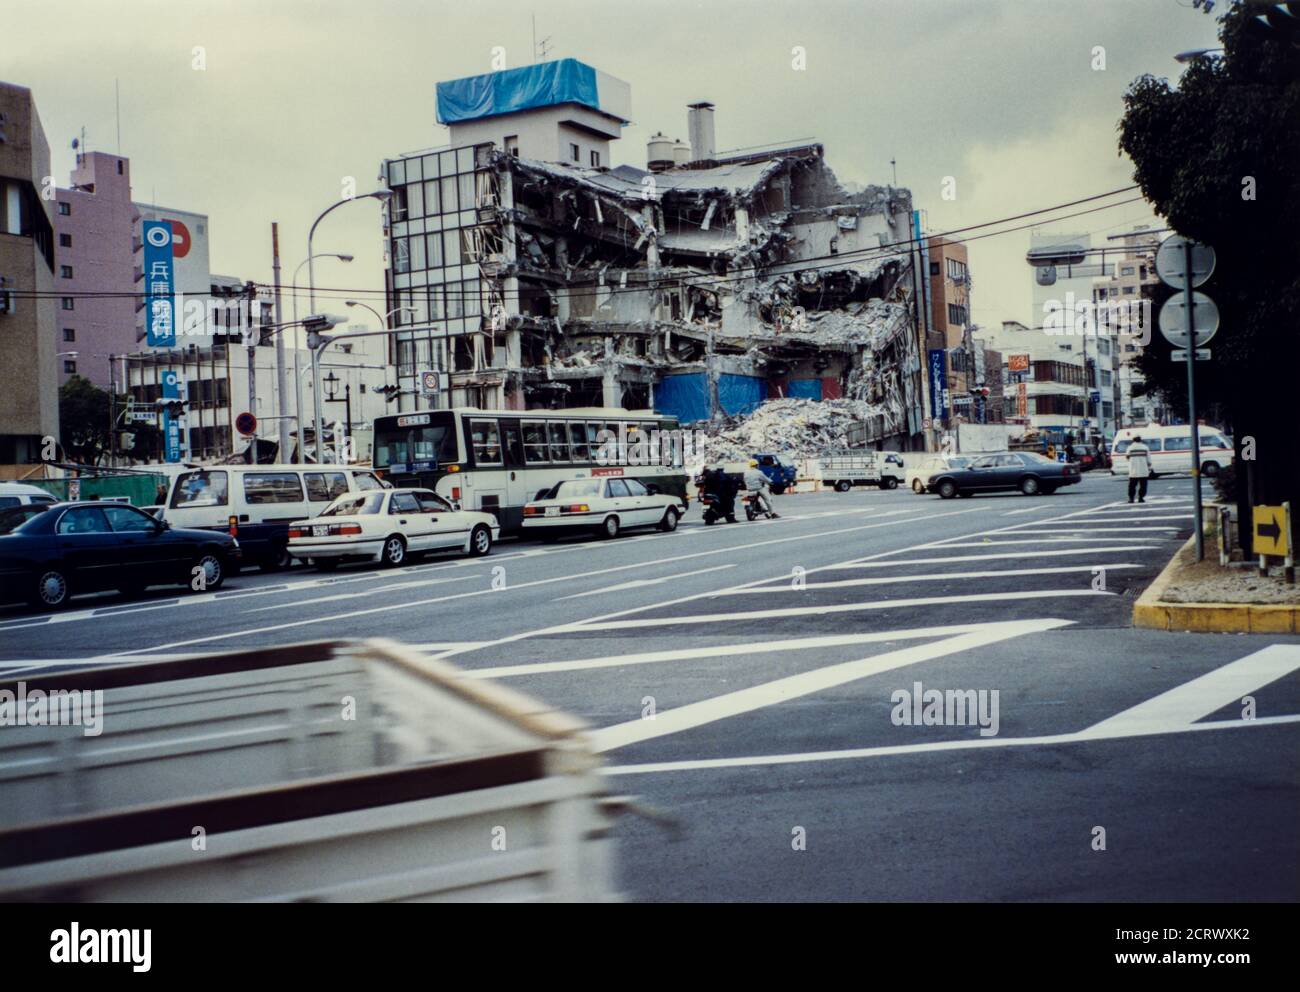 Building in central Kobe, Japan destroyed by 1995 Great Hanshin Earthquake Stock Photo